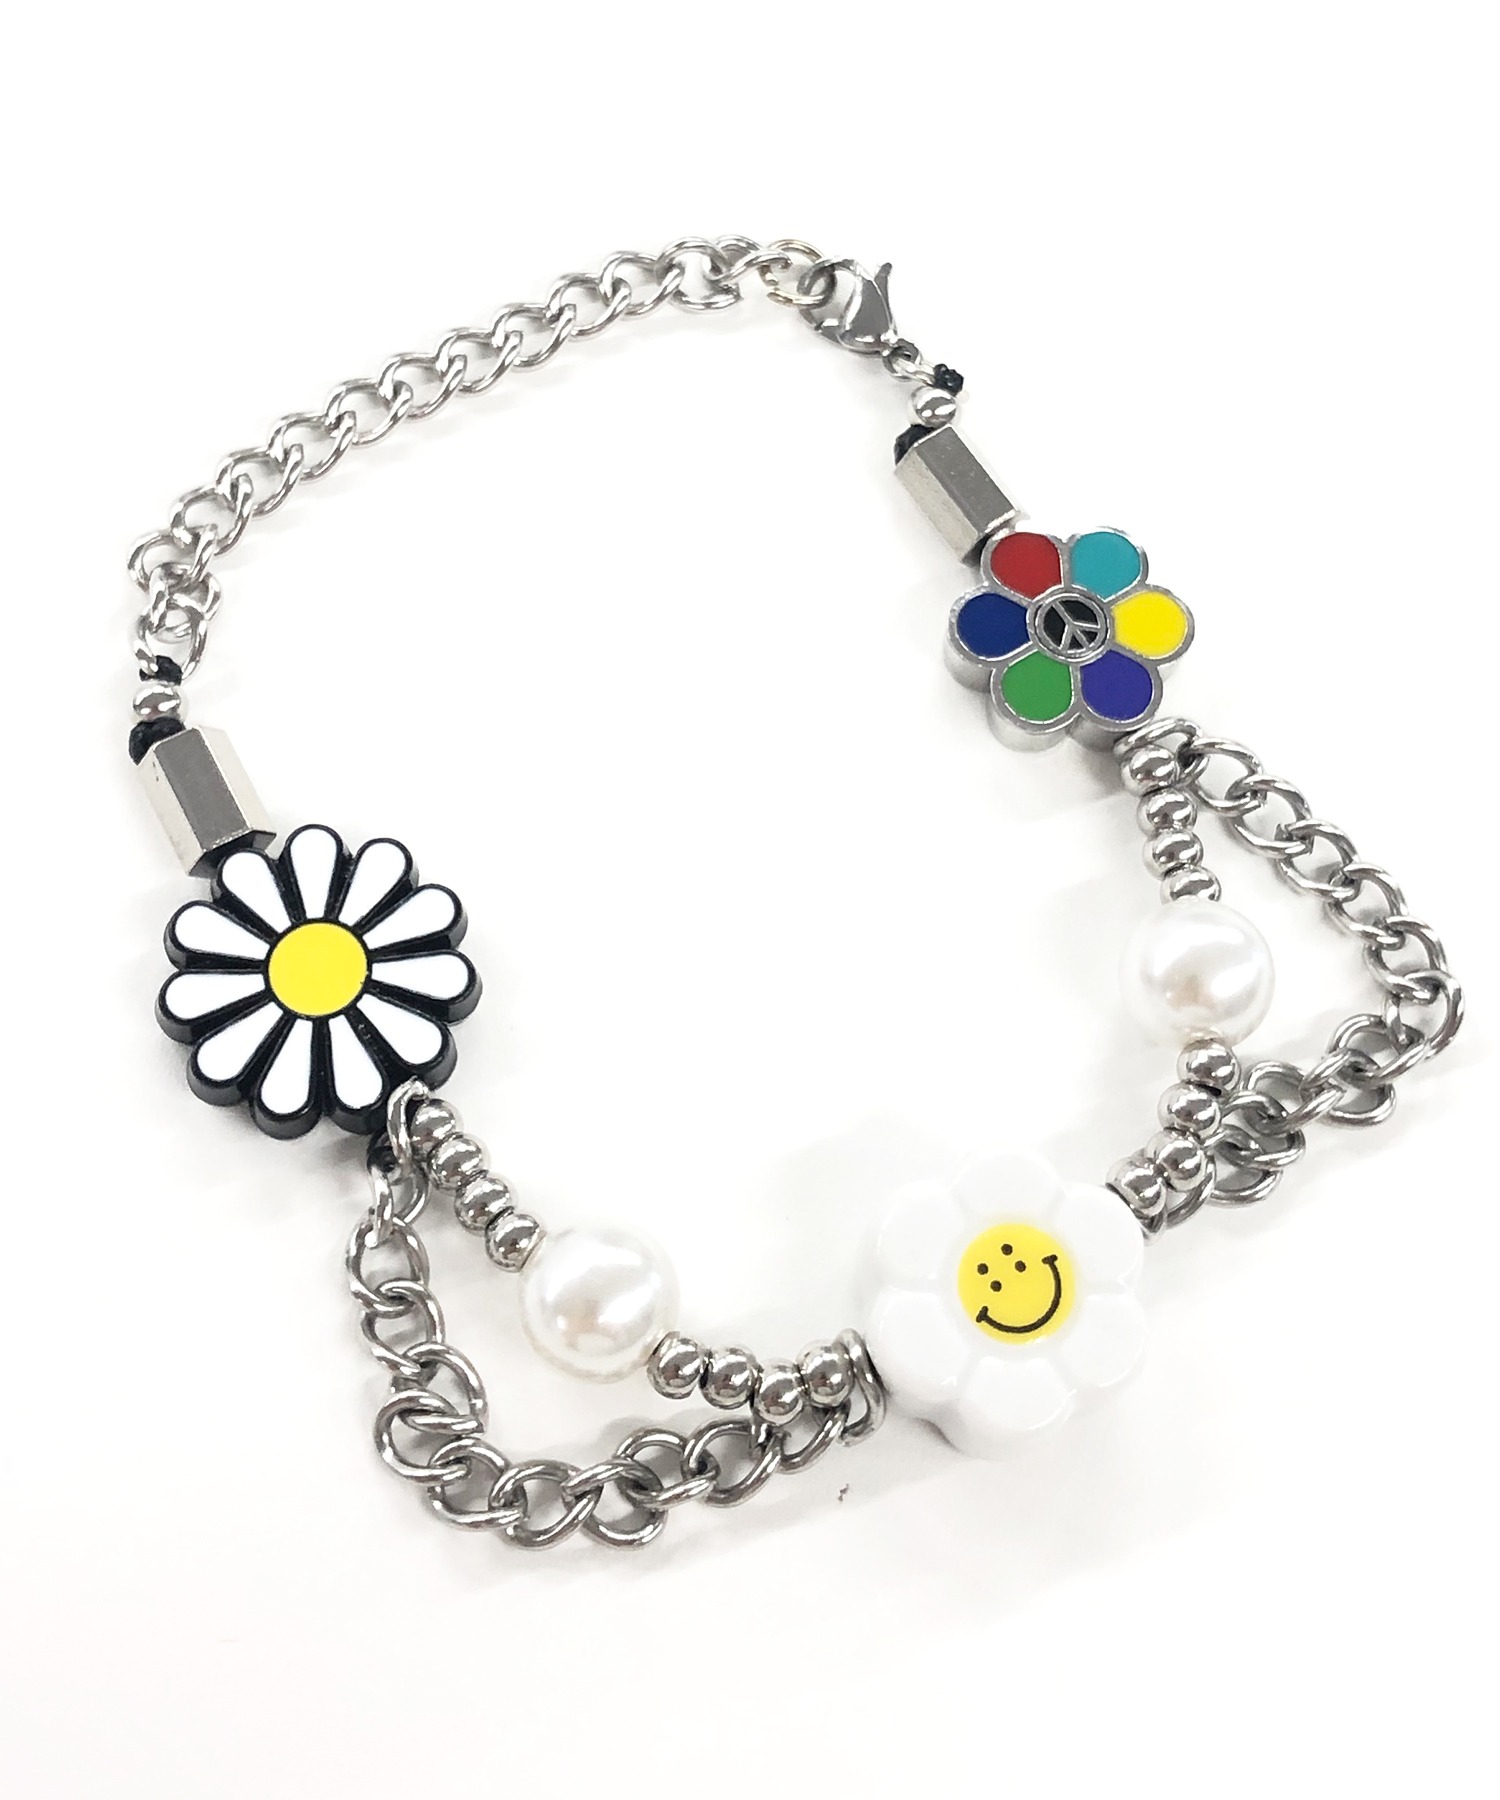 SALUTE/サルーテ』 FLOWER ANARCHY PEARL CHARMS BRACELET by SALUTE